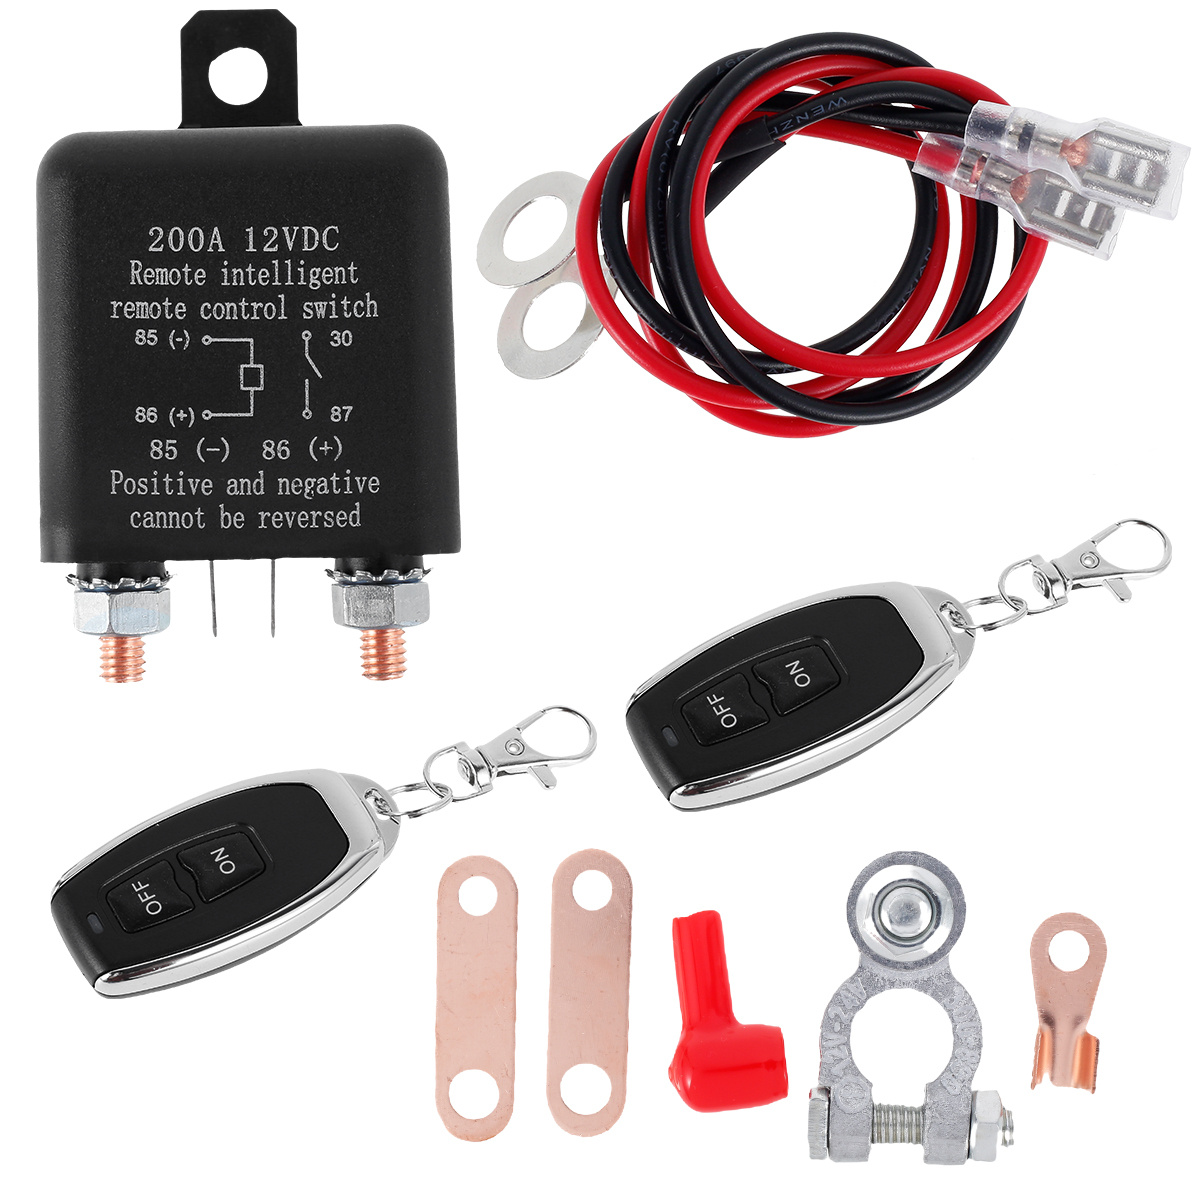 12V 500A Remote Control Power Switch Cut Off Energy Saving Isolator  Anti-Theft Remote Power-off Switch for Marine Boat RV Car